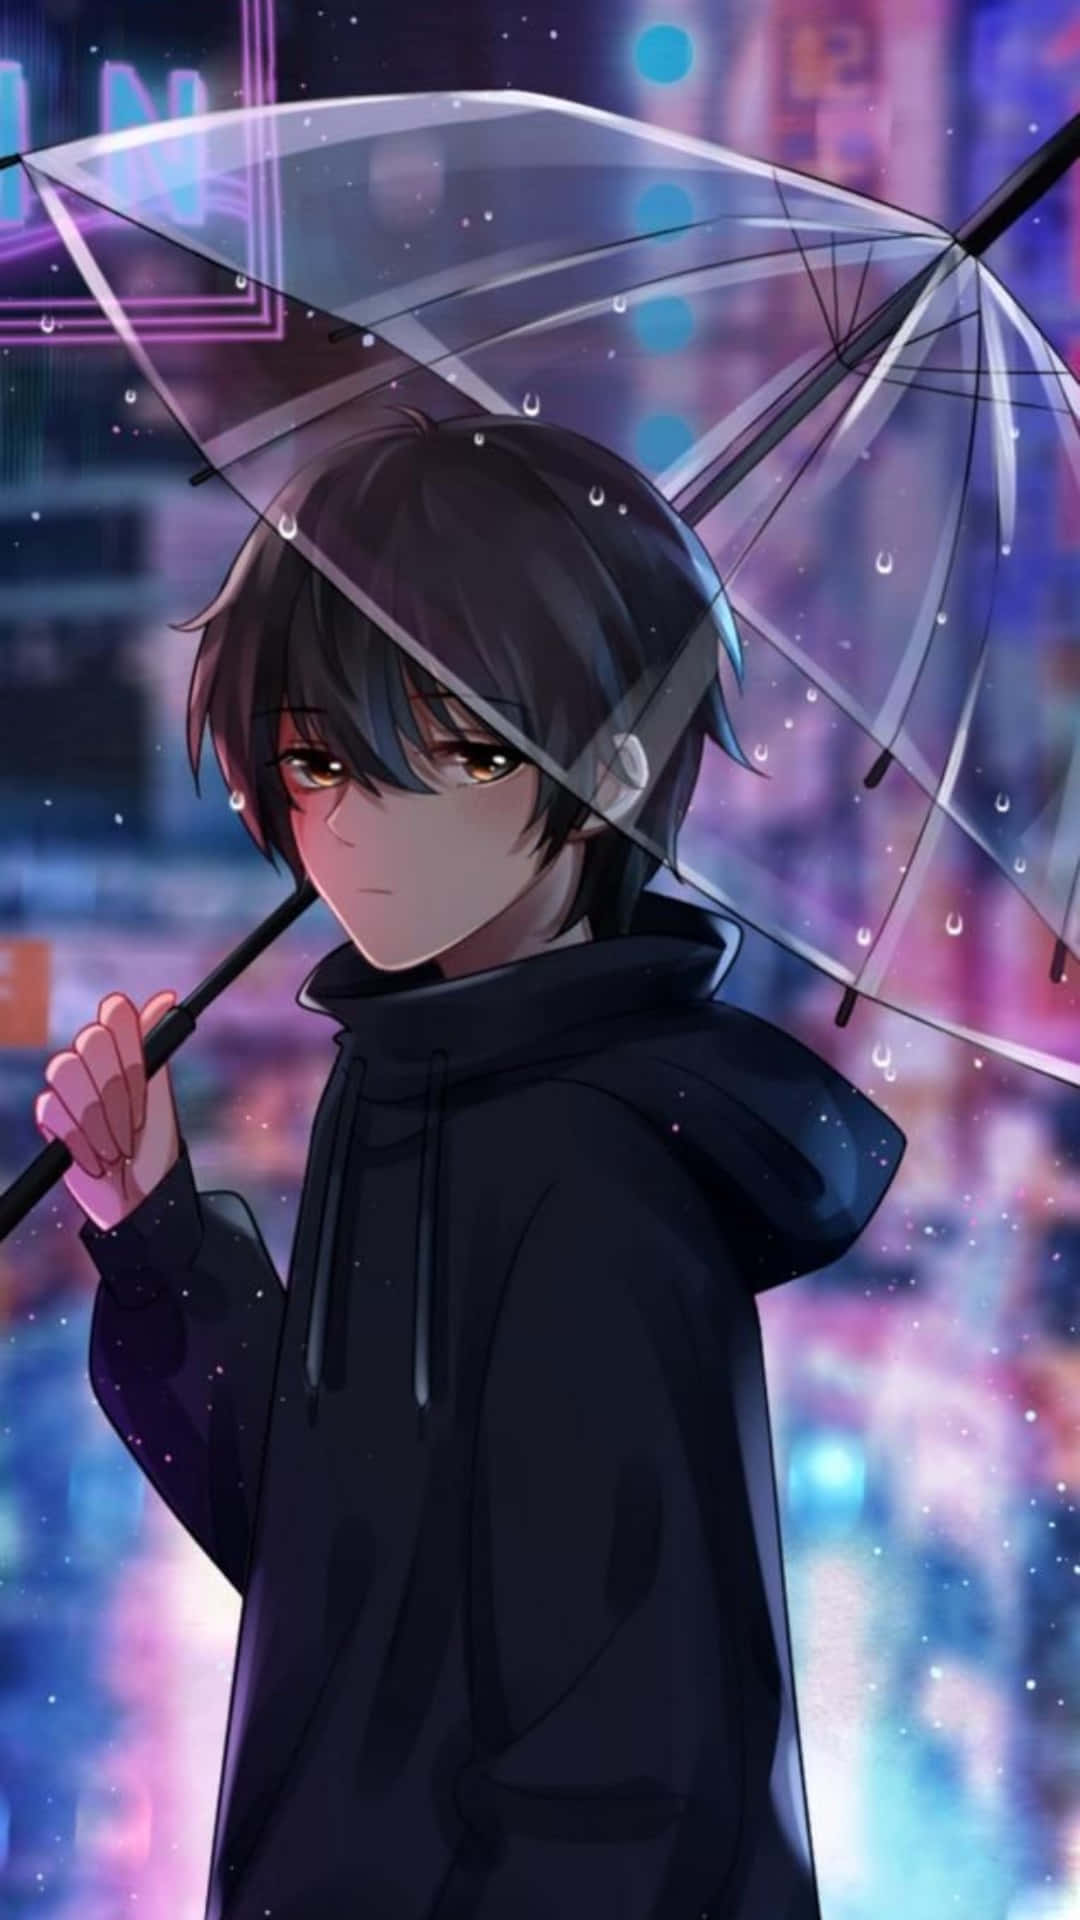 Mysterious Anime Boy With Umbrella Wallpaper